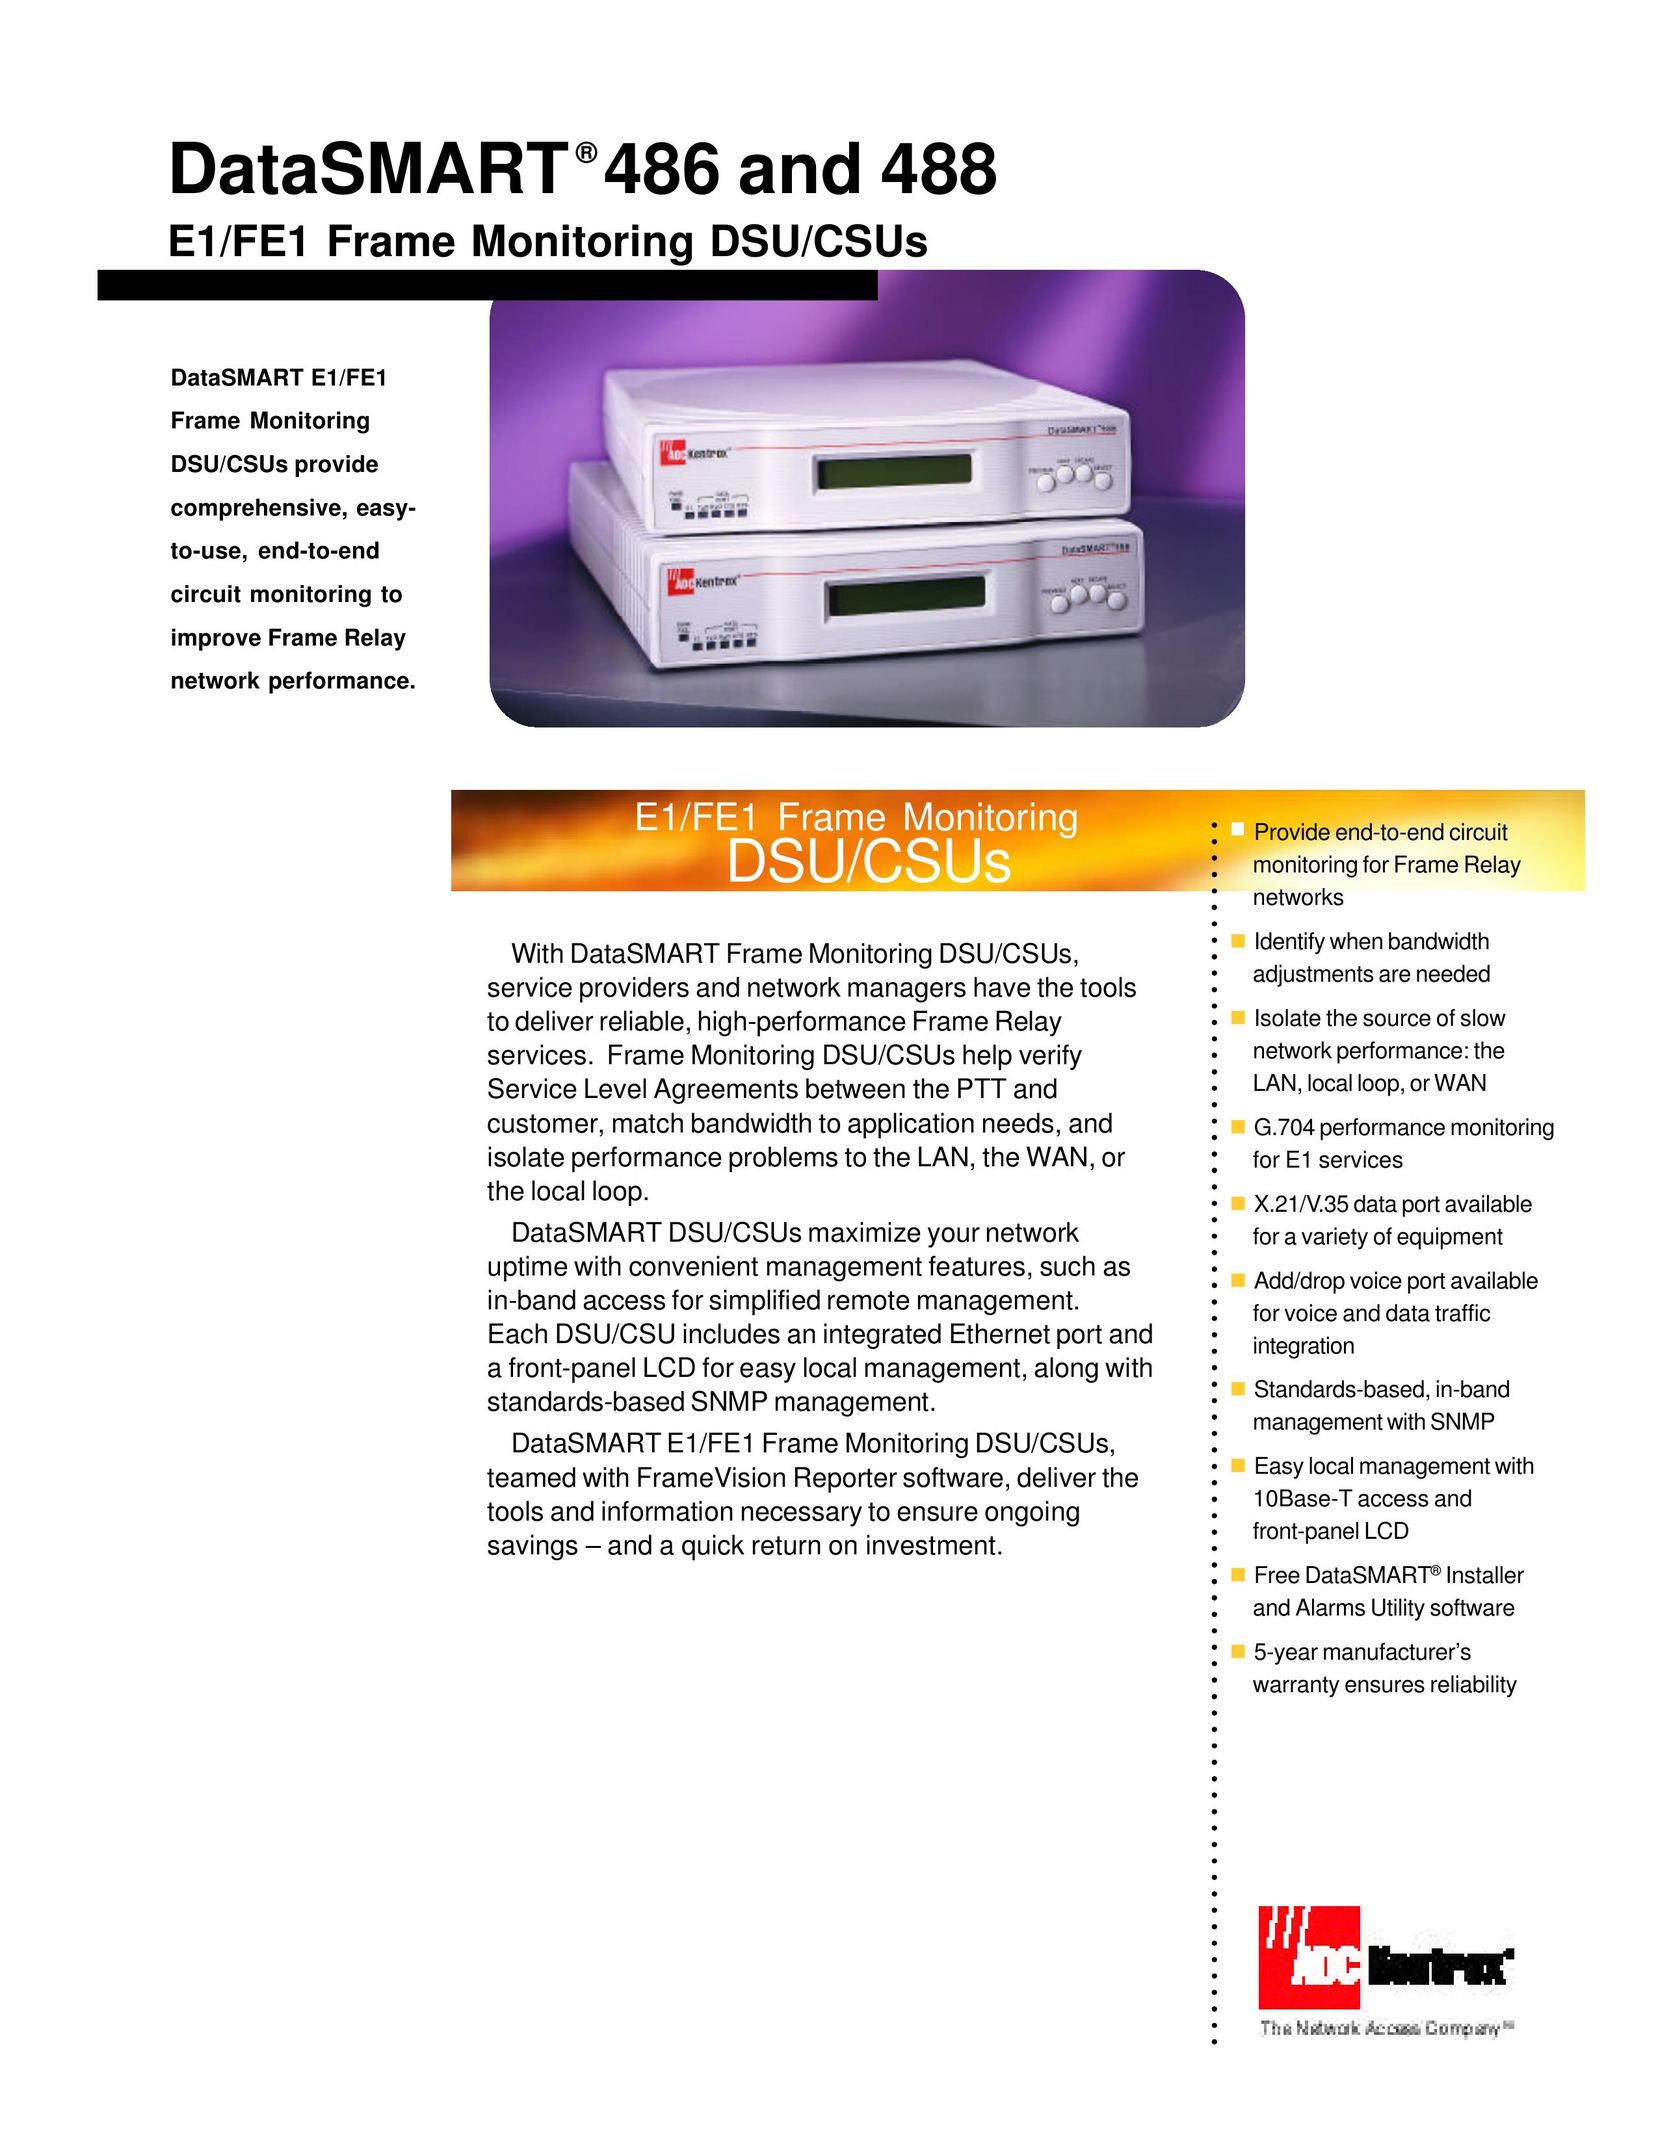 Kentrox 488 Network Router User Manual